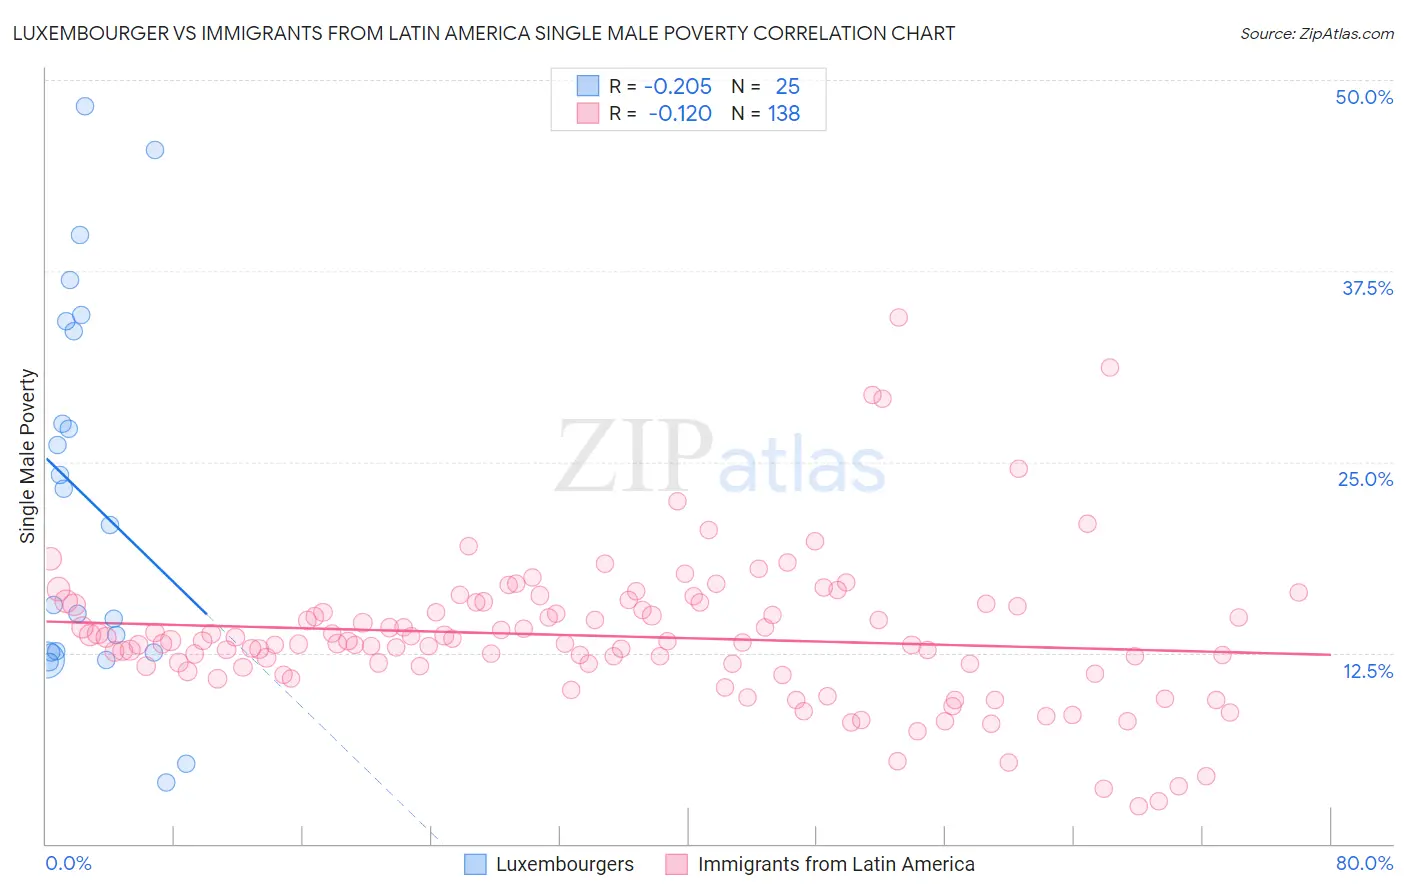 Luxembourger vs Immigrants from Latin America Single Male Poverty